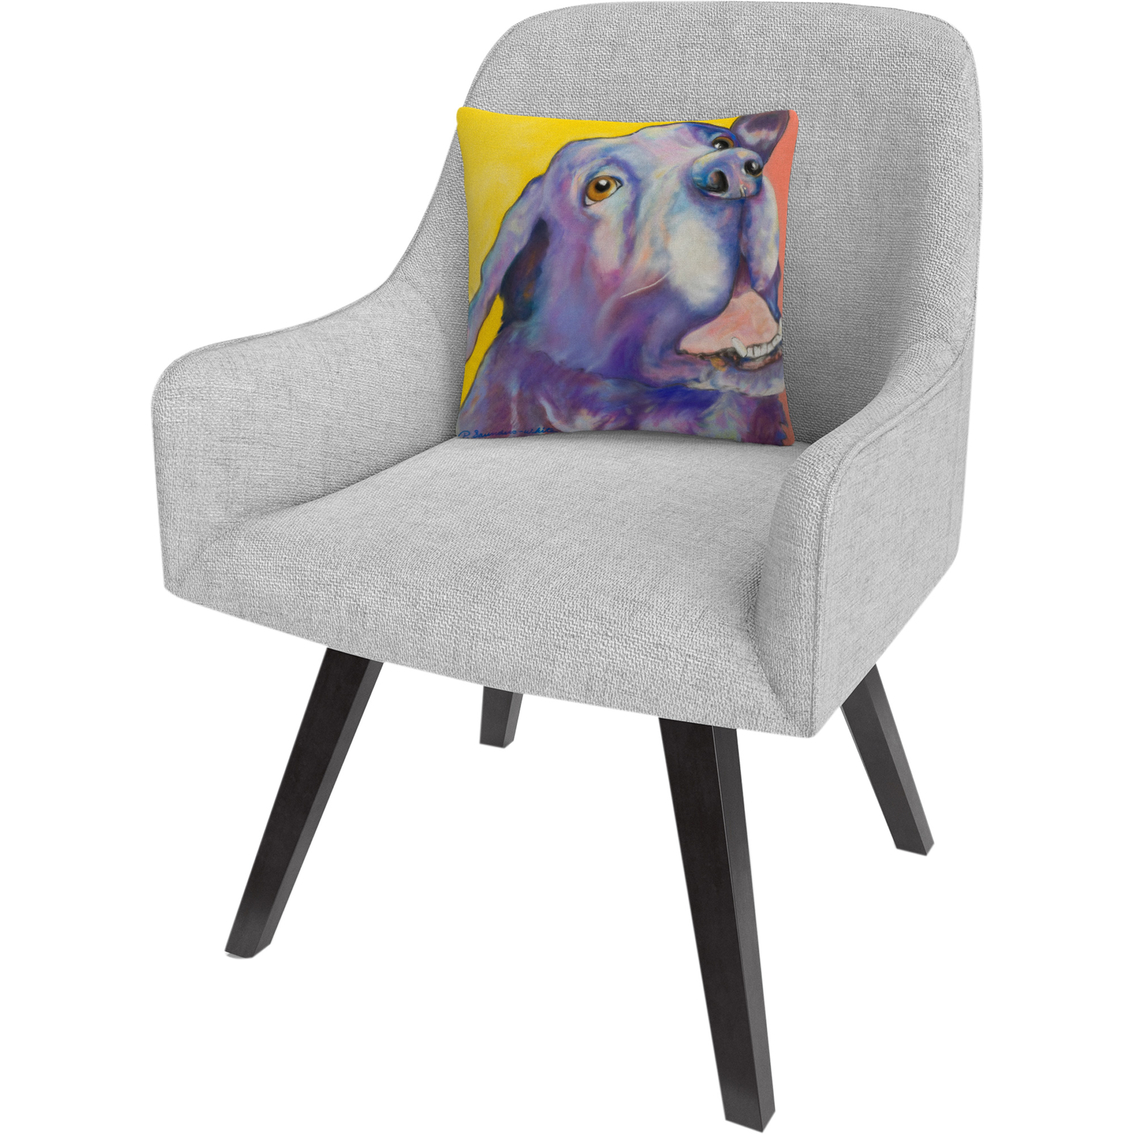 Trademark Fine Art Shadow Animals Pets Painting Bold Decorative Throw Pillow - Image 2 of 2